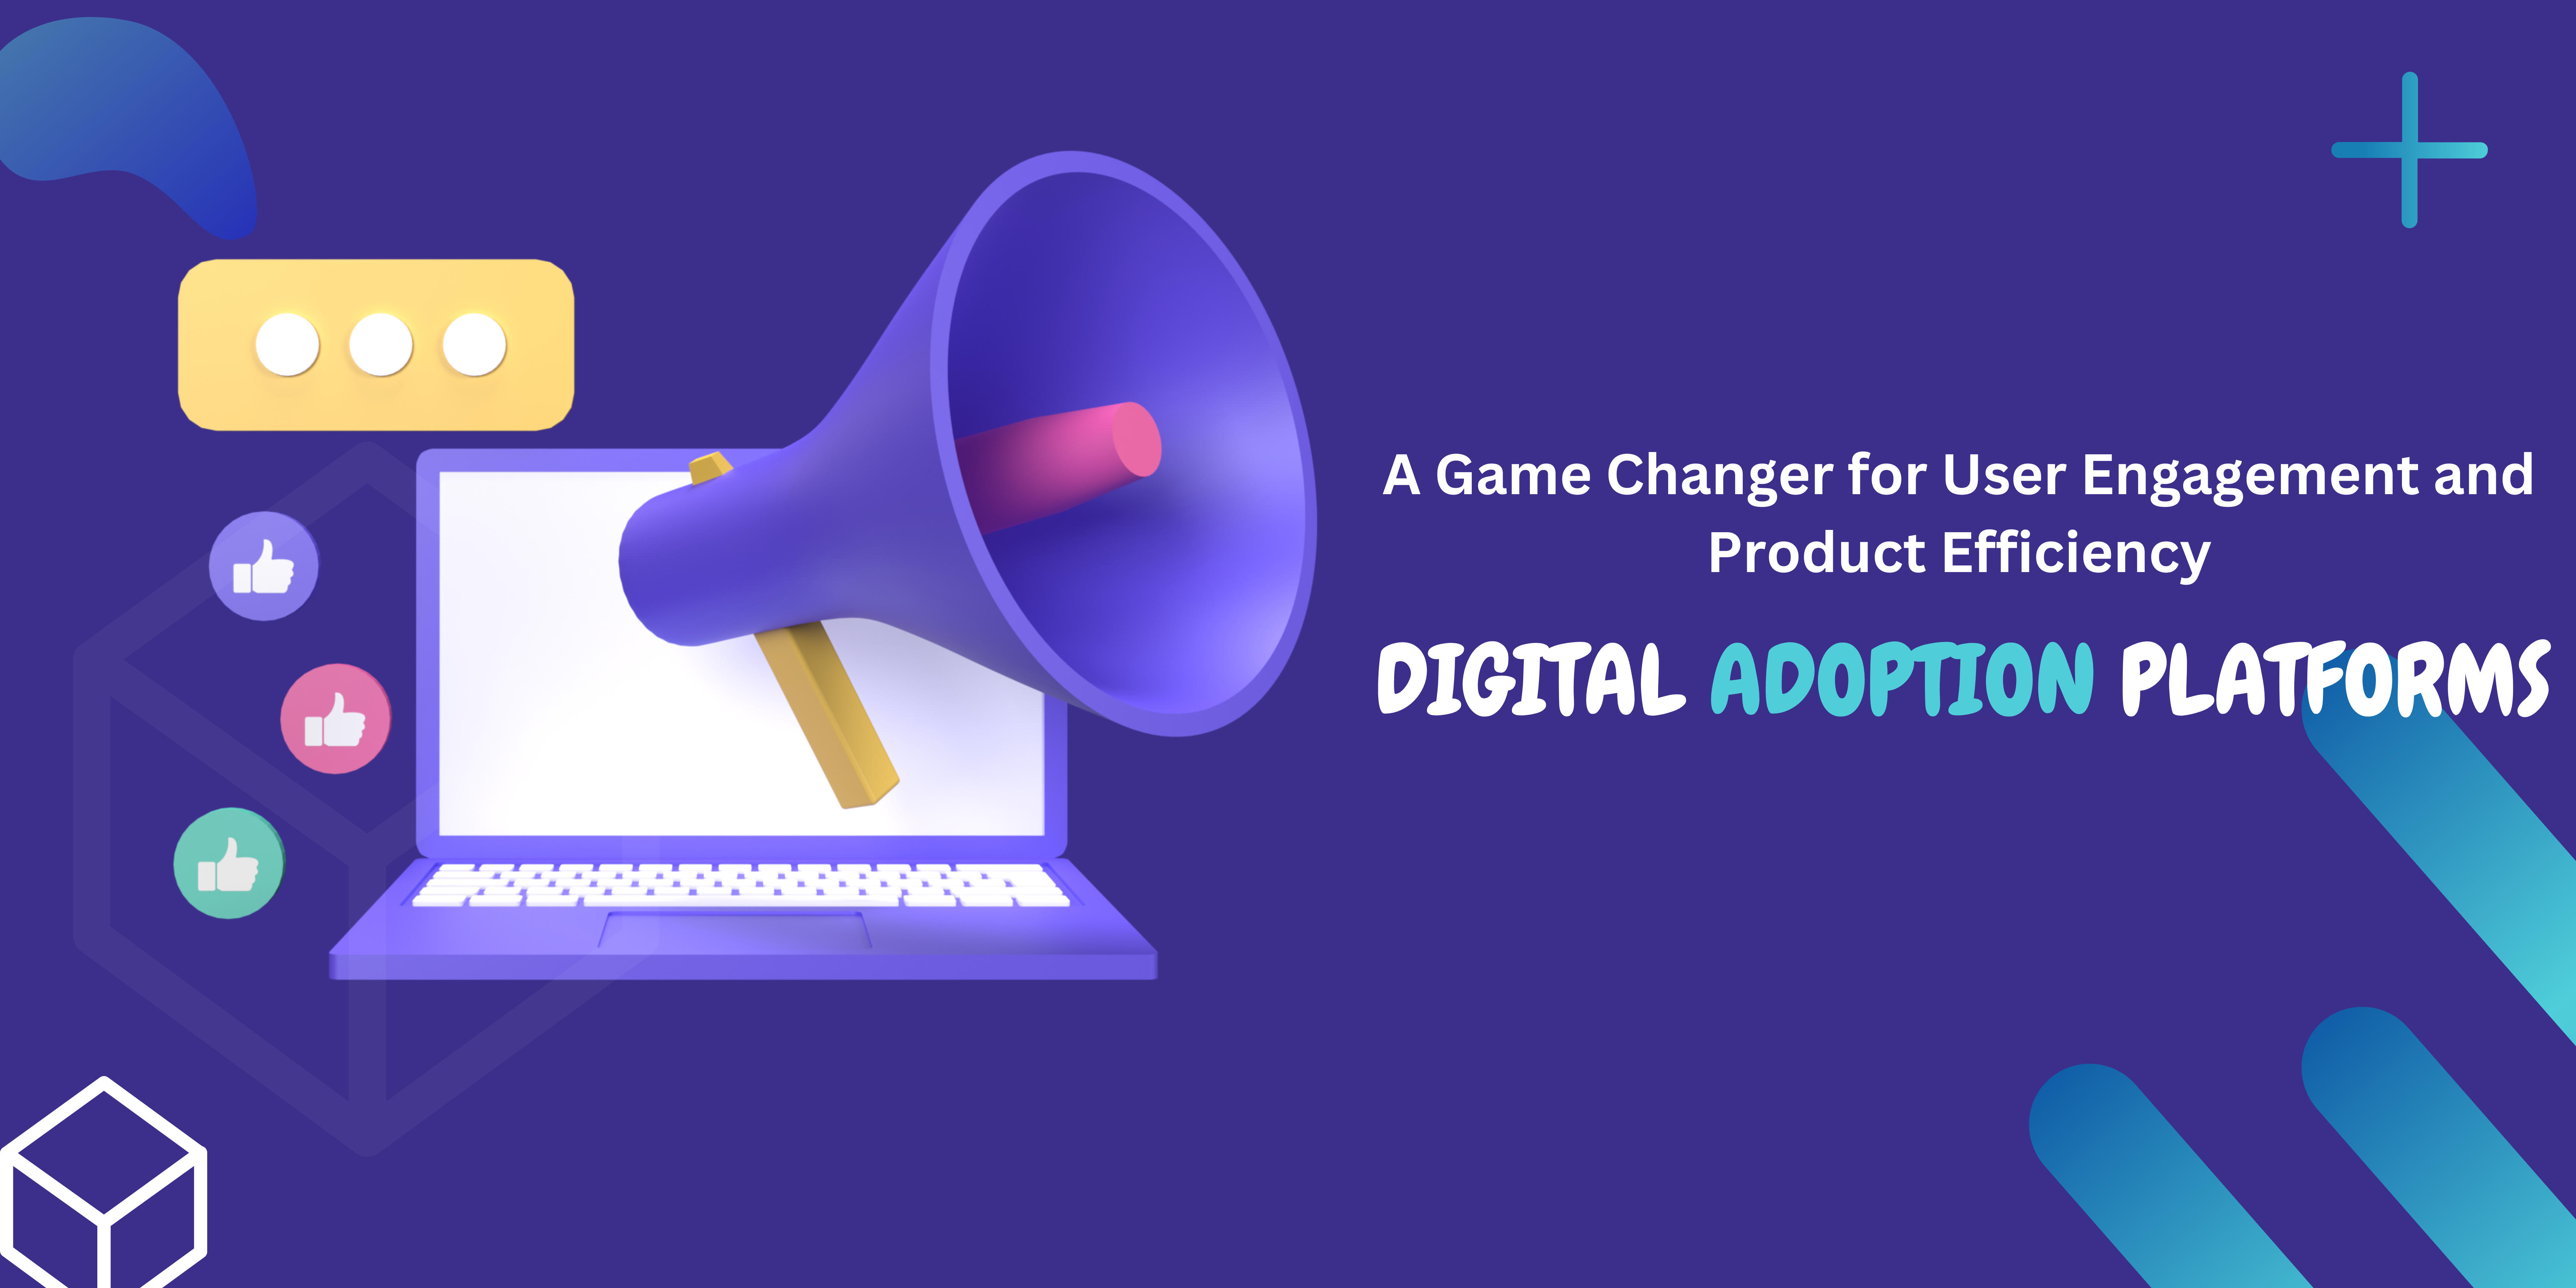 Digital Adoption Platforms - A Game Changer for User Engagement and Product Efficiency